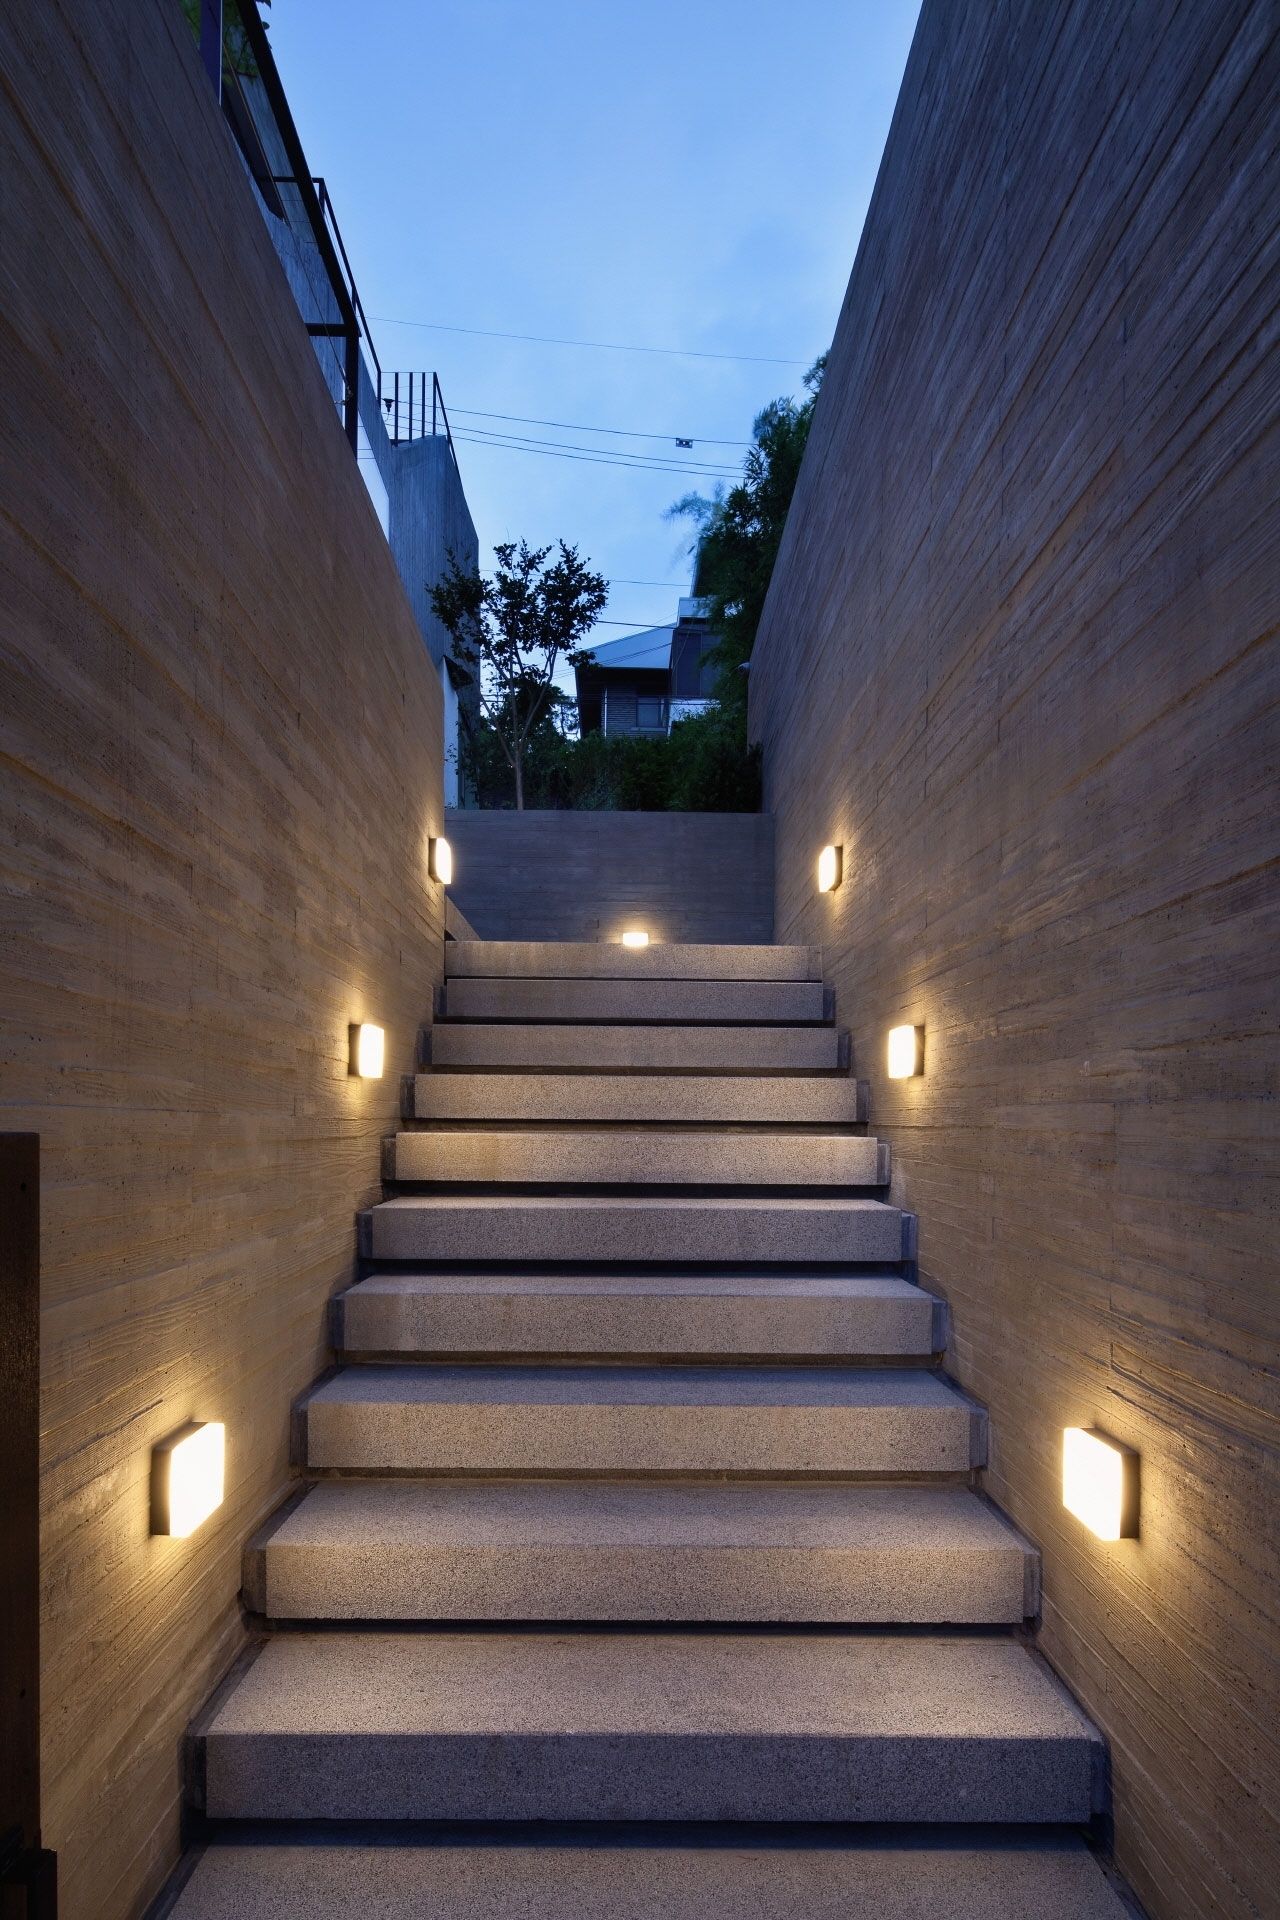 Lighting For Houses Outdoor Wall Lights For Houses Awesome Led Only Pertaining To Outdoor Wall Lights For Houses (View 4 of 15)